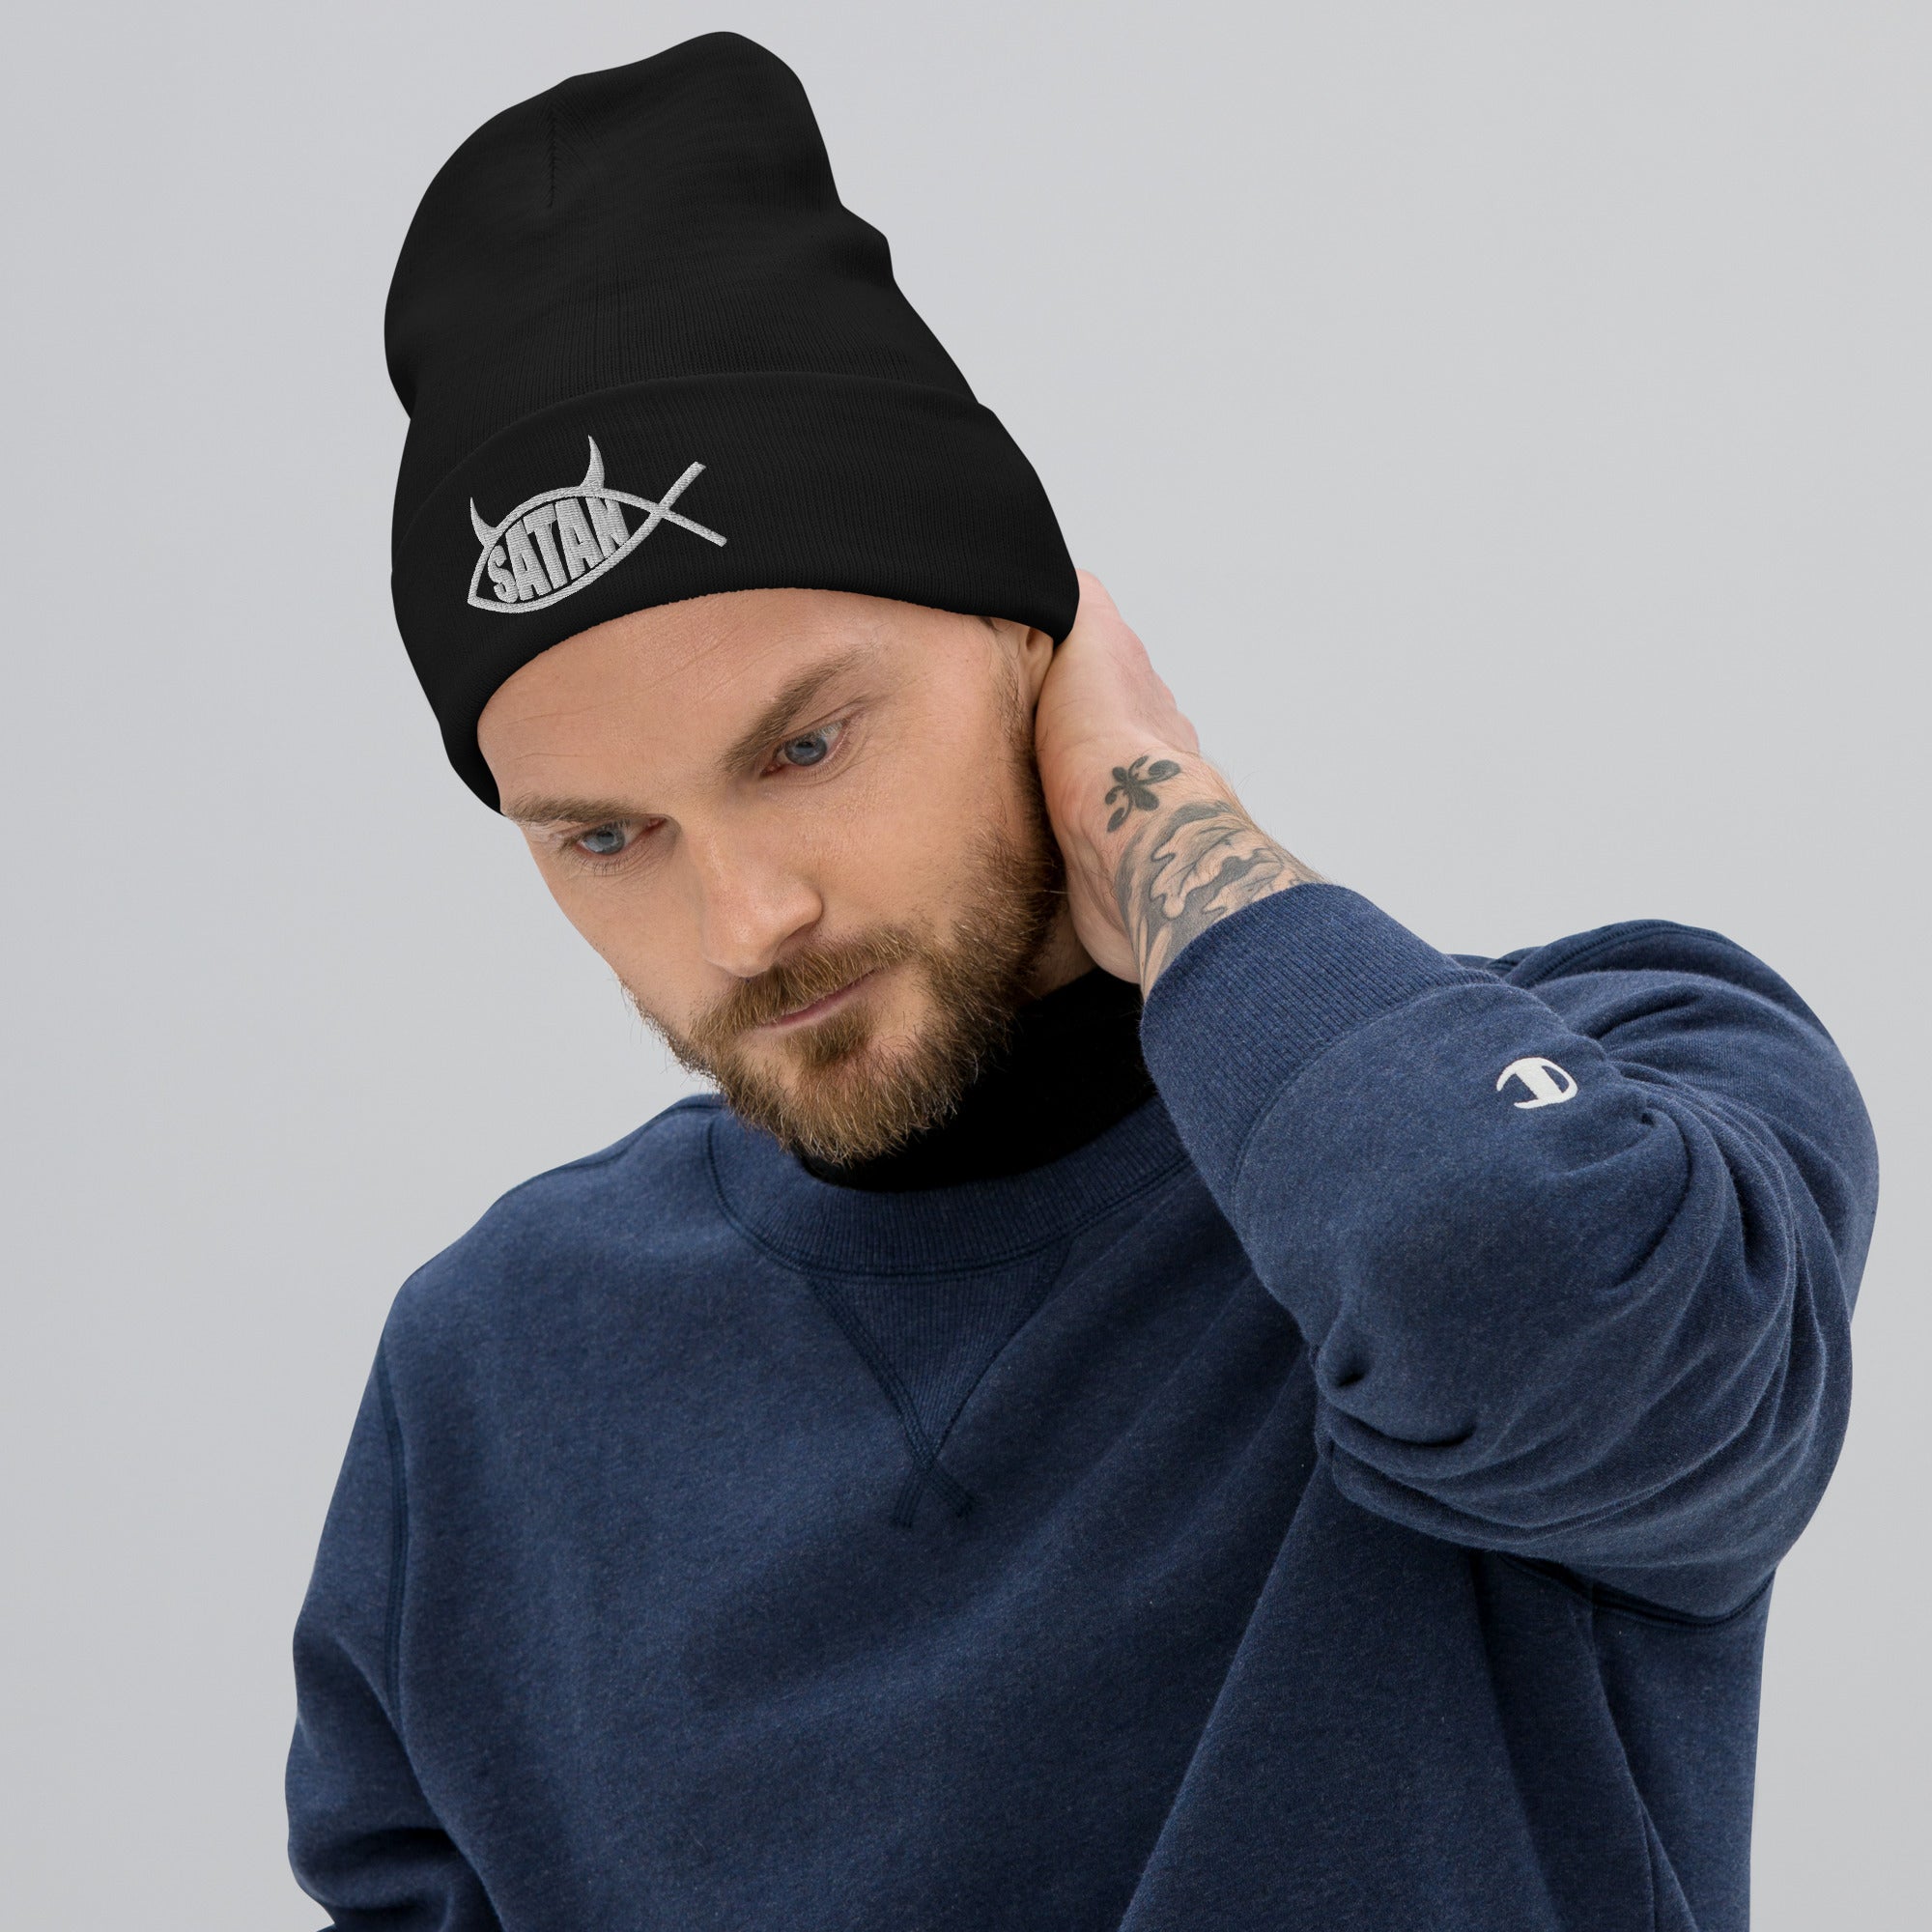 Satan Fish with Horns Religious Satire Embroidered Cuff Beanie - Edge of Life Designs